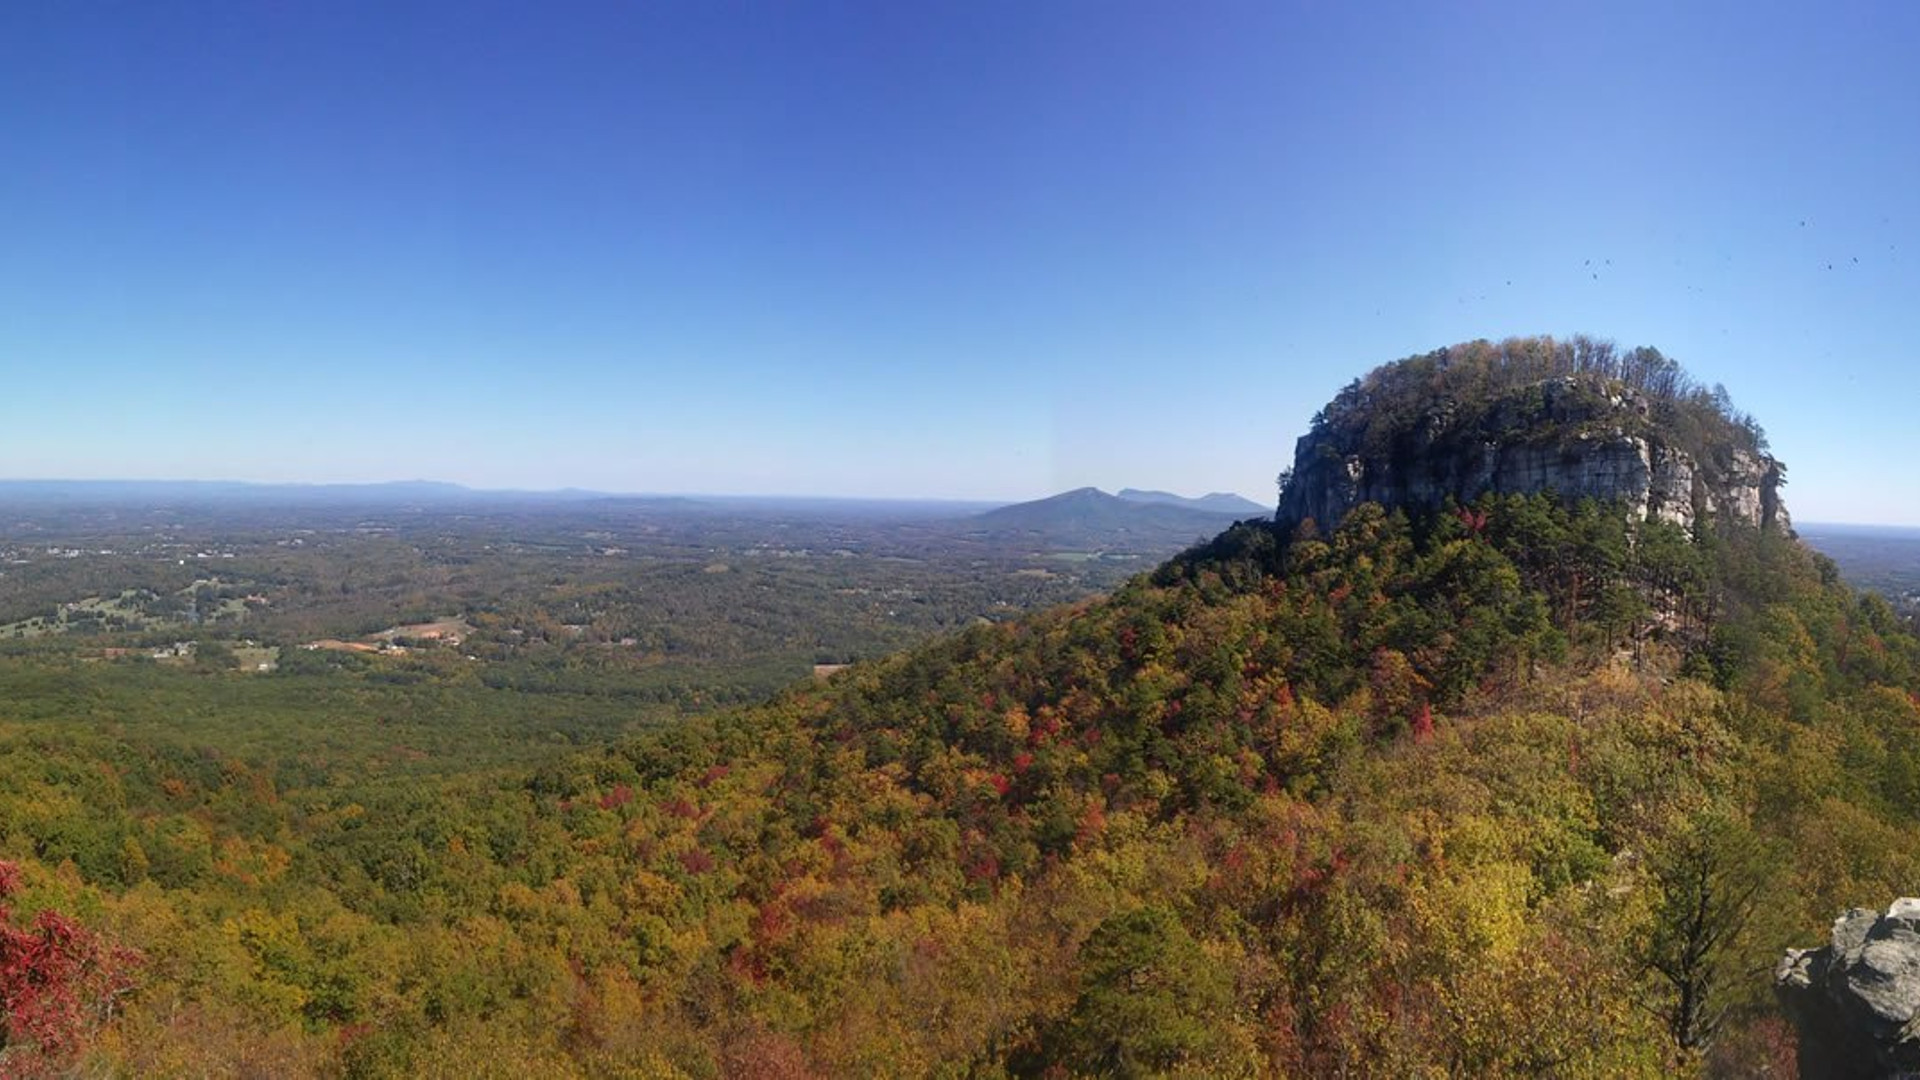 Is Pilot Mountain, North Carolina, one of the pillars of the Earth?